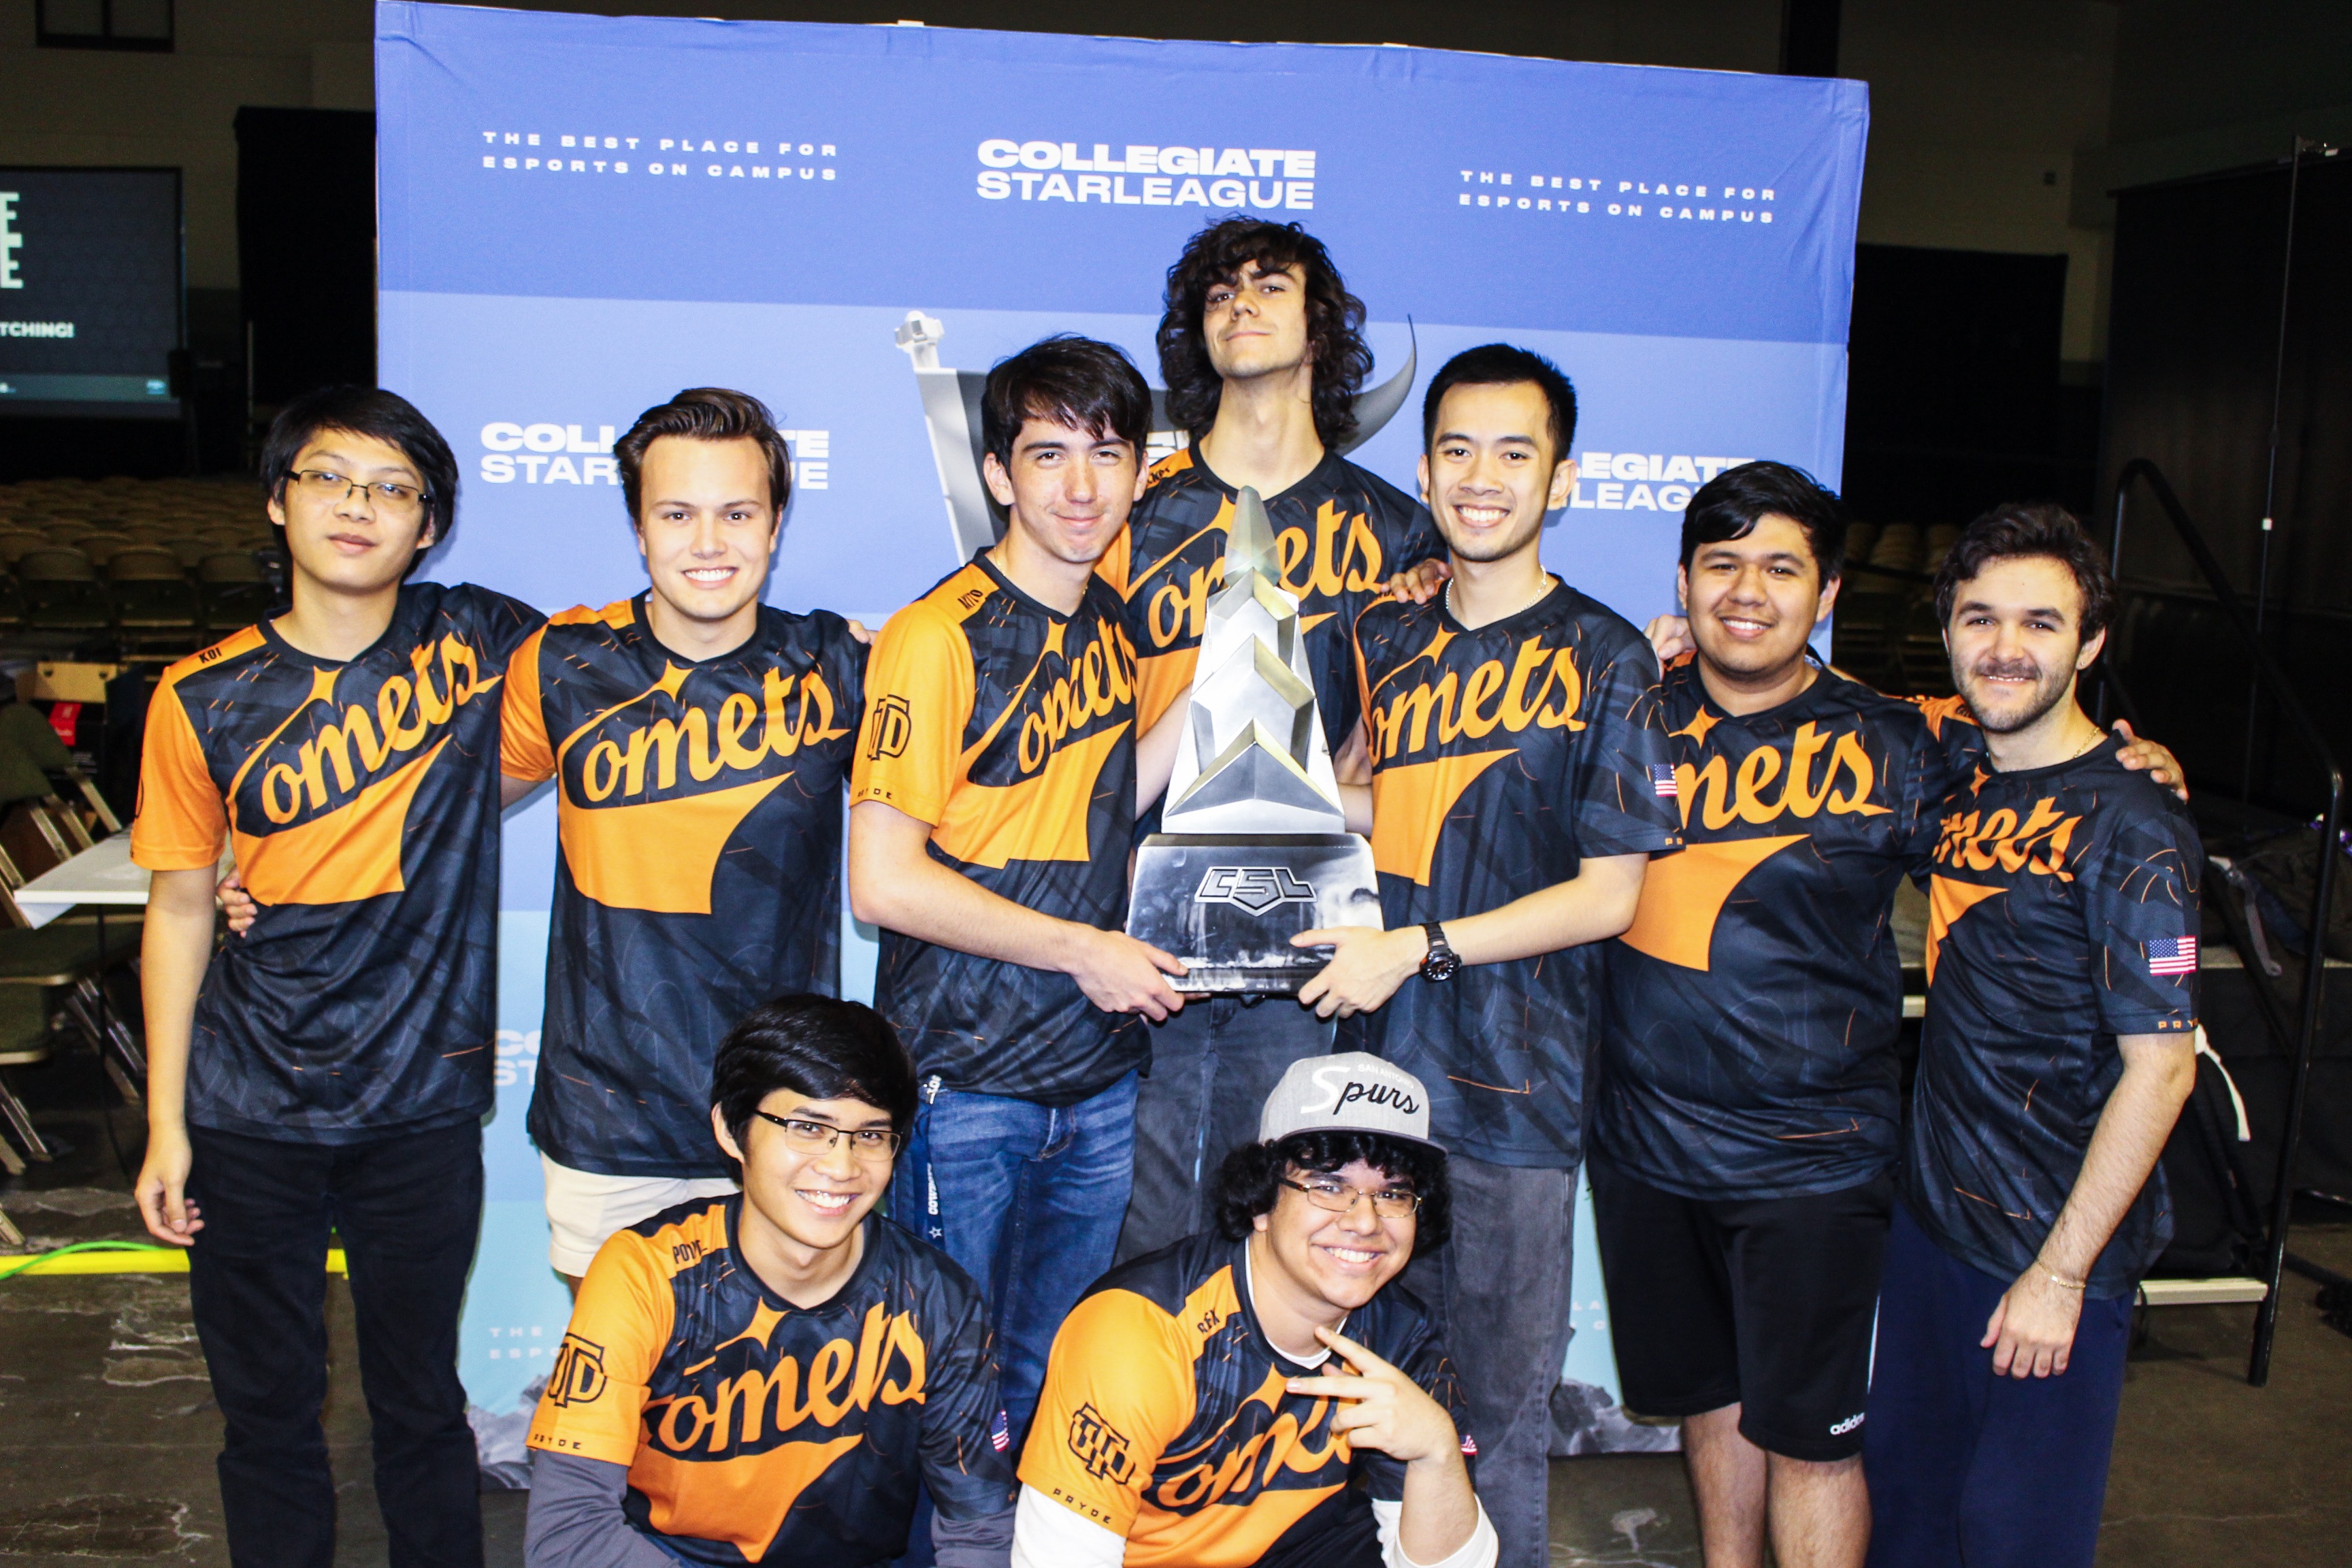 ‘Super Smash’  team members become first to win national championship